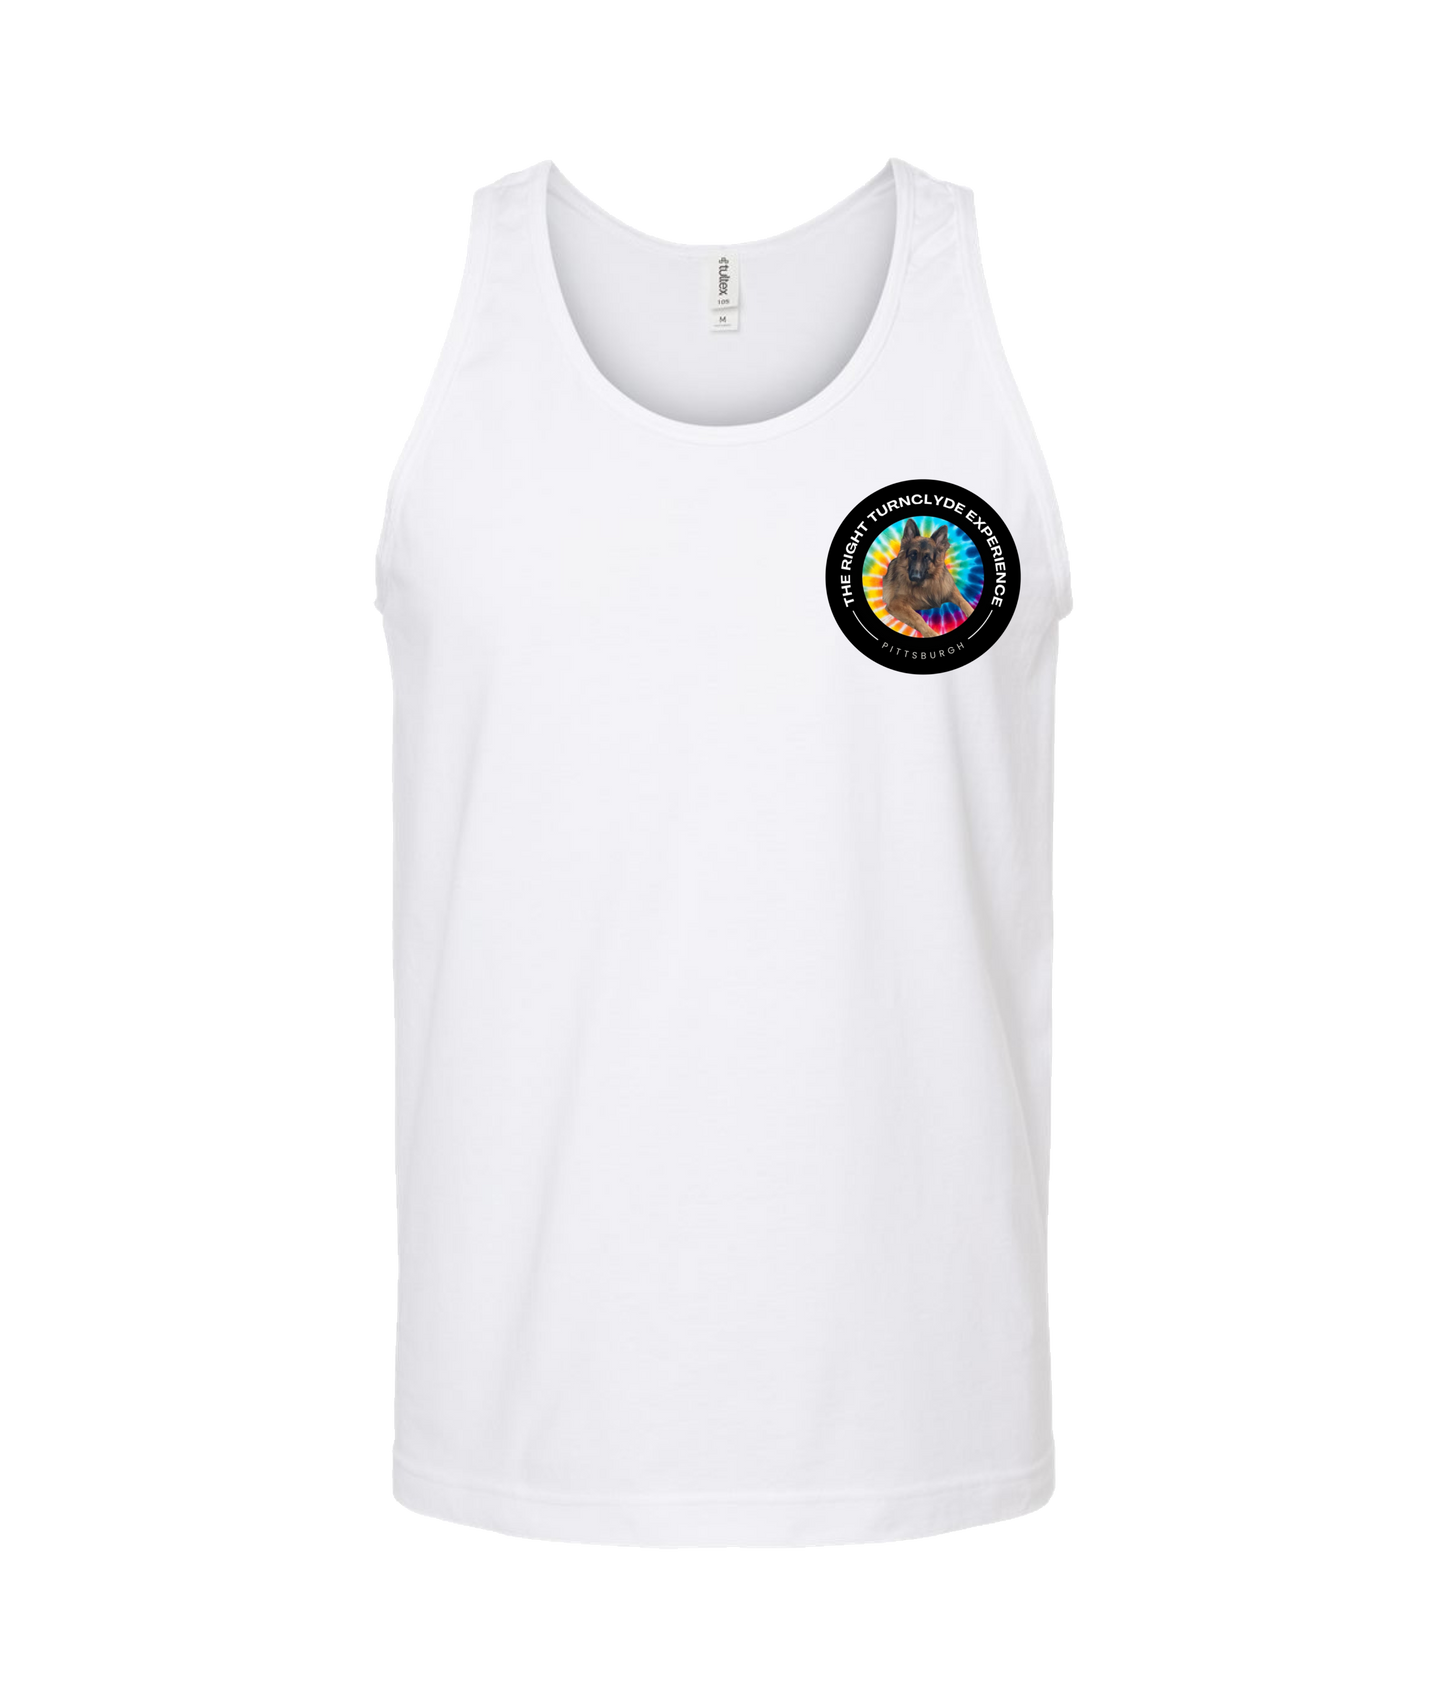 Right TurnClyde "Brucie Gear" Merchandise - Right TurnClyde "Brucie Gear" Merchandise - White Tank Top